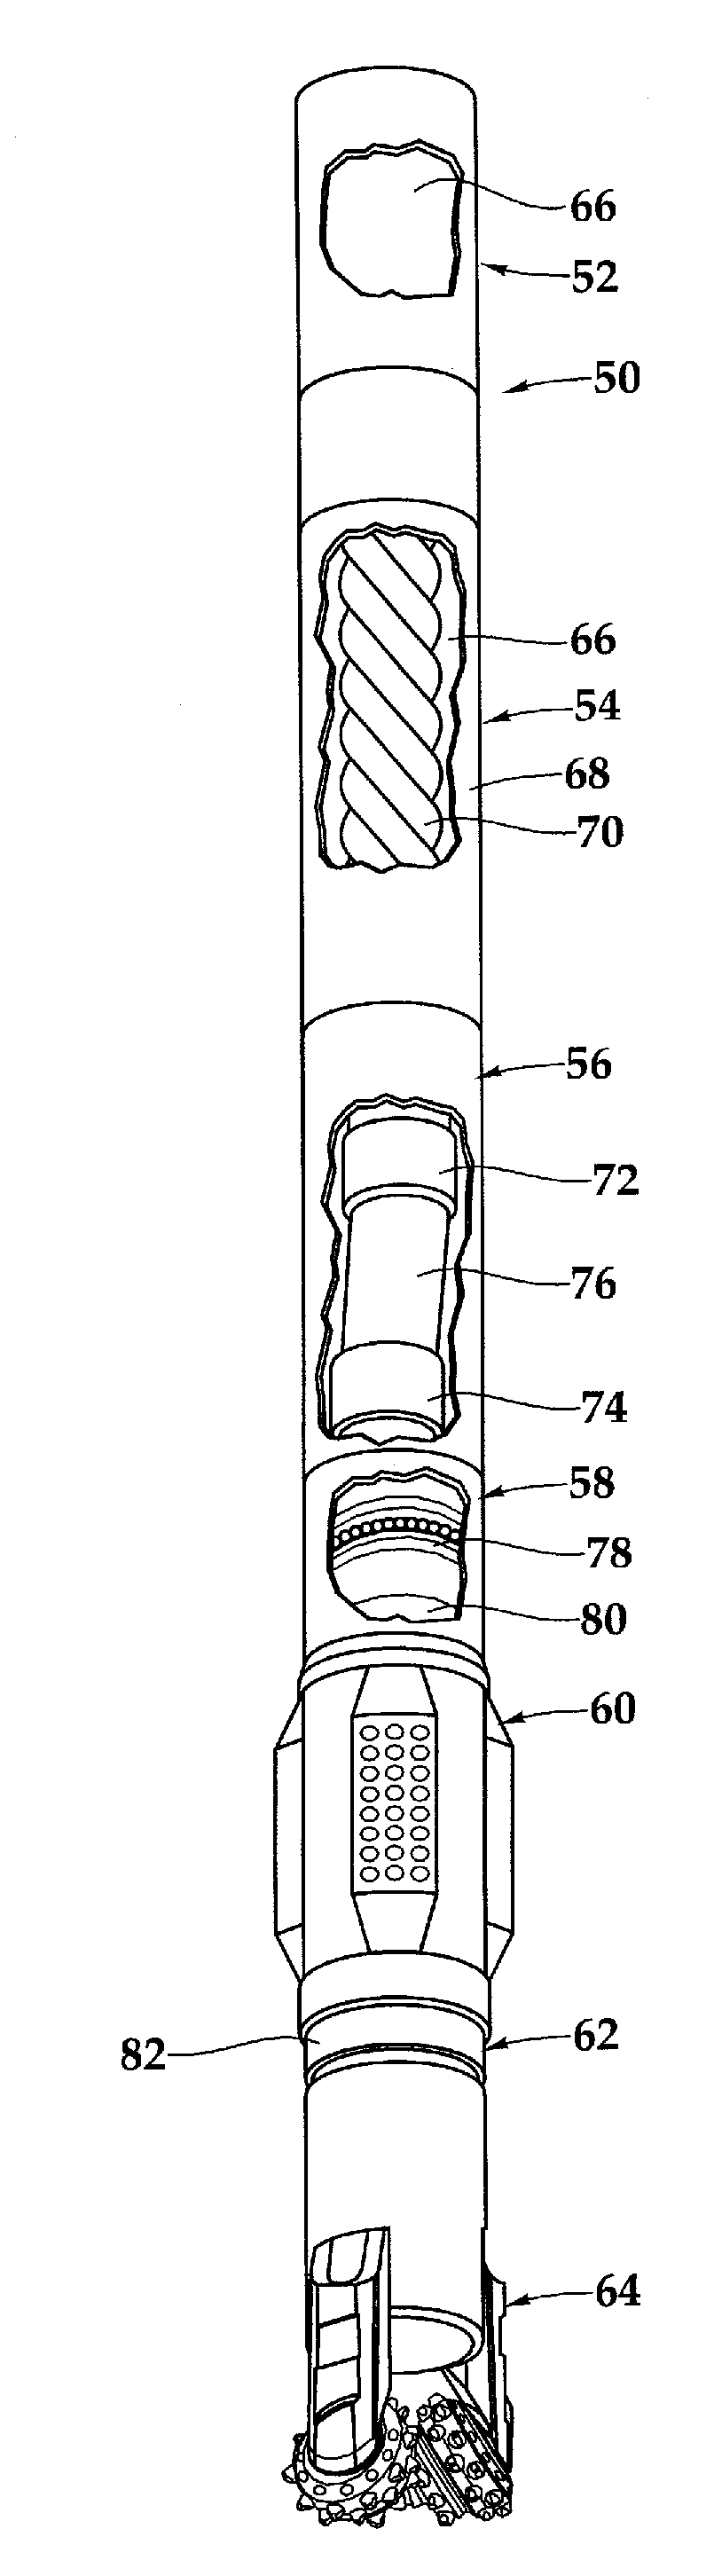 Apparatus and method for high temperature drilling operations